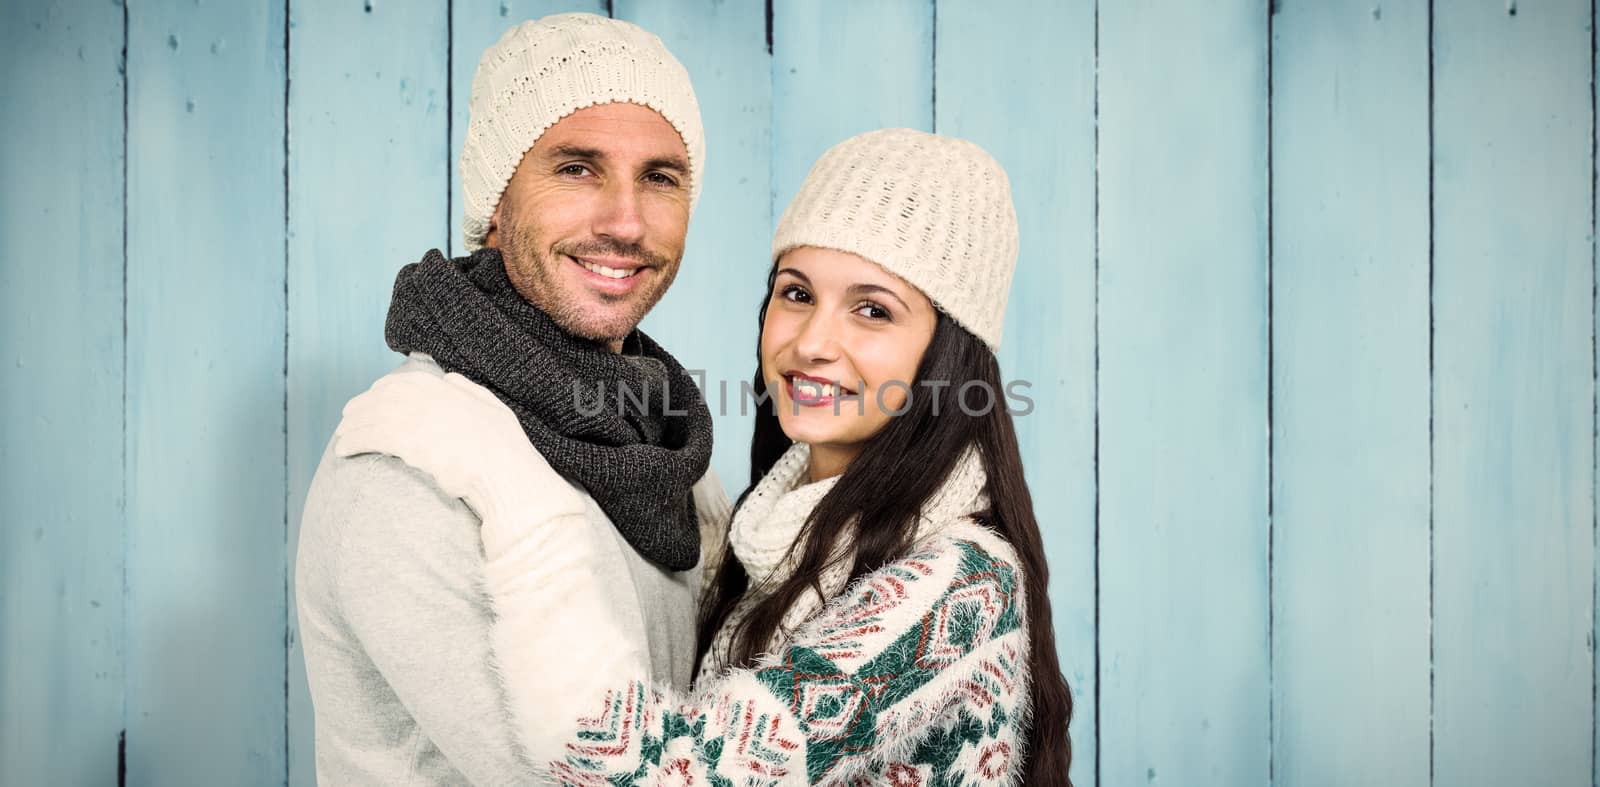 Smiling couple hugging and looking at camera against wooden planks